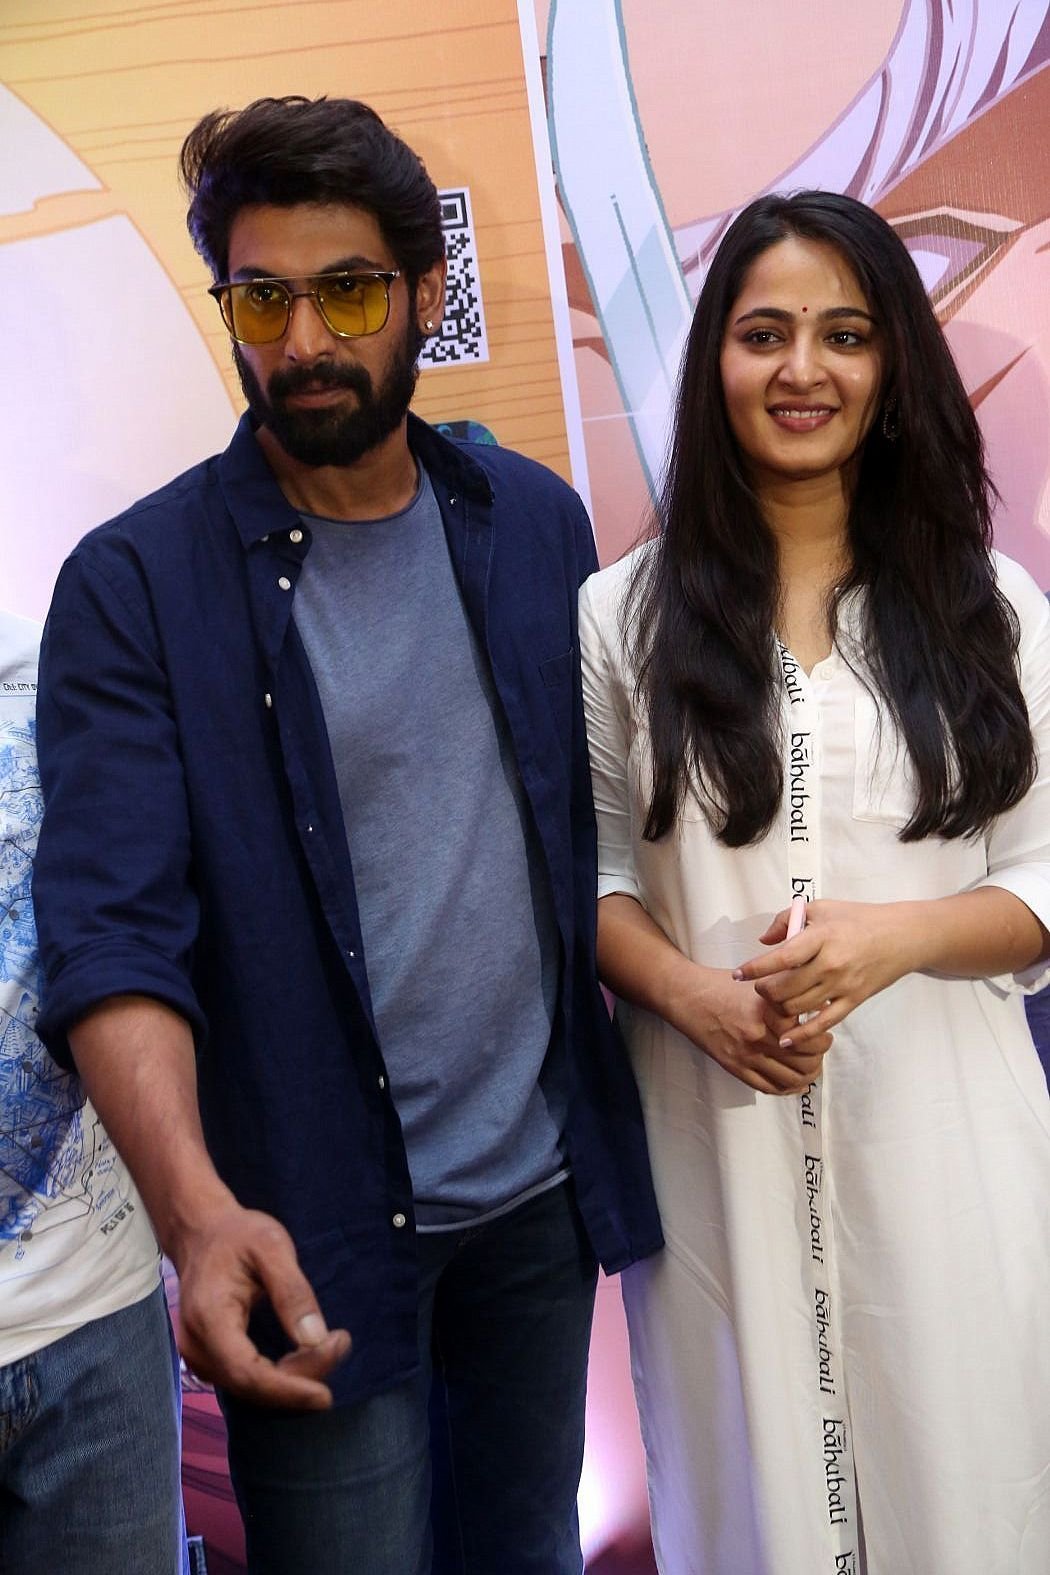 The World of Baahubali Press Meet Photos | Picture 1495159